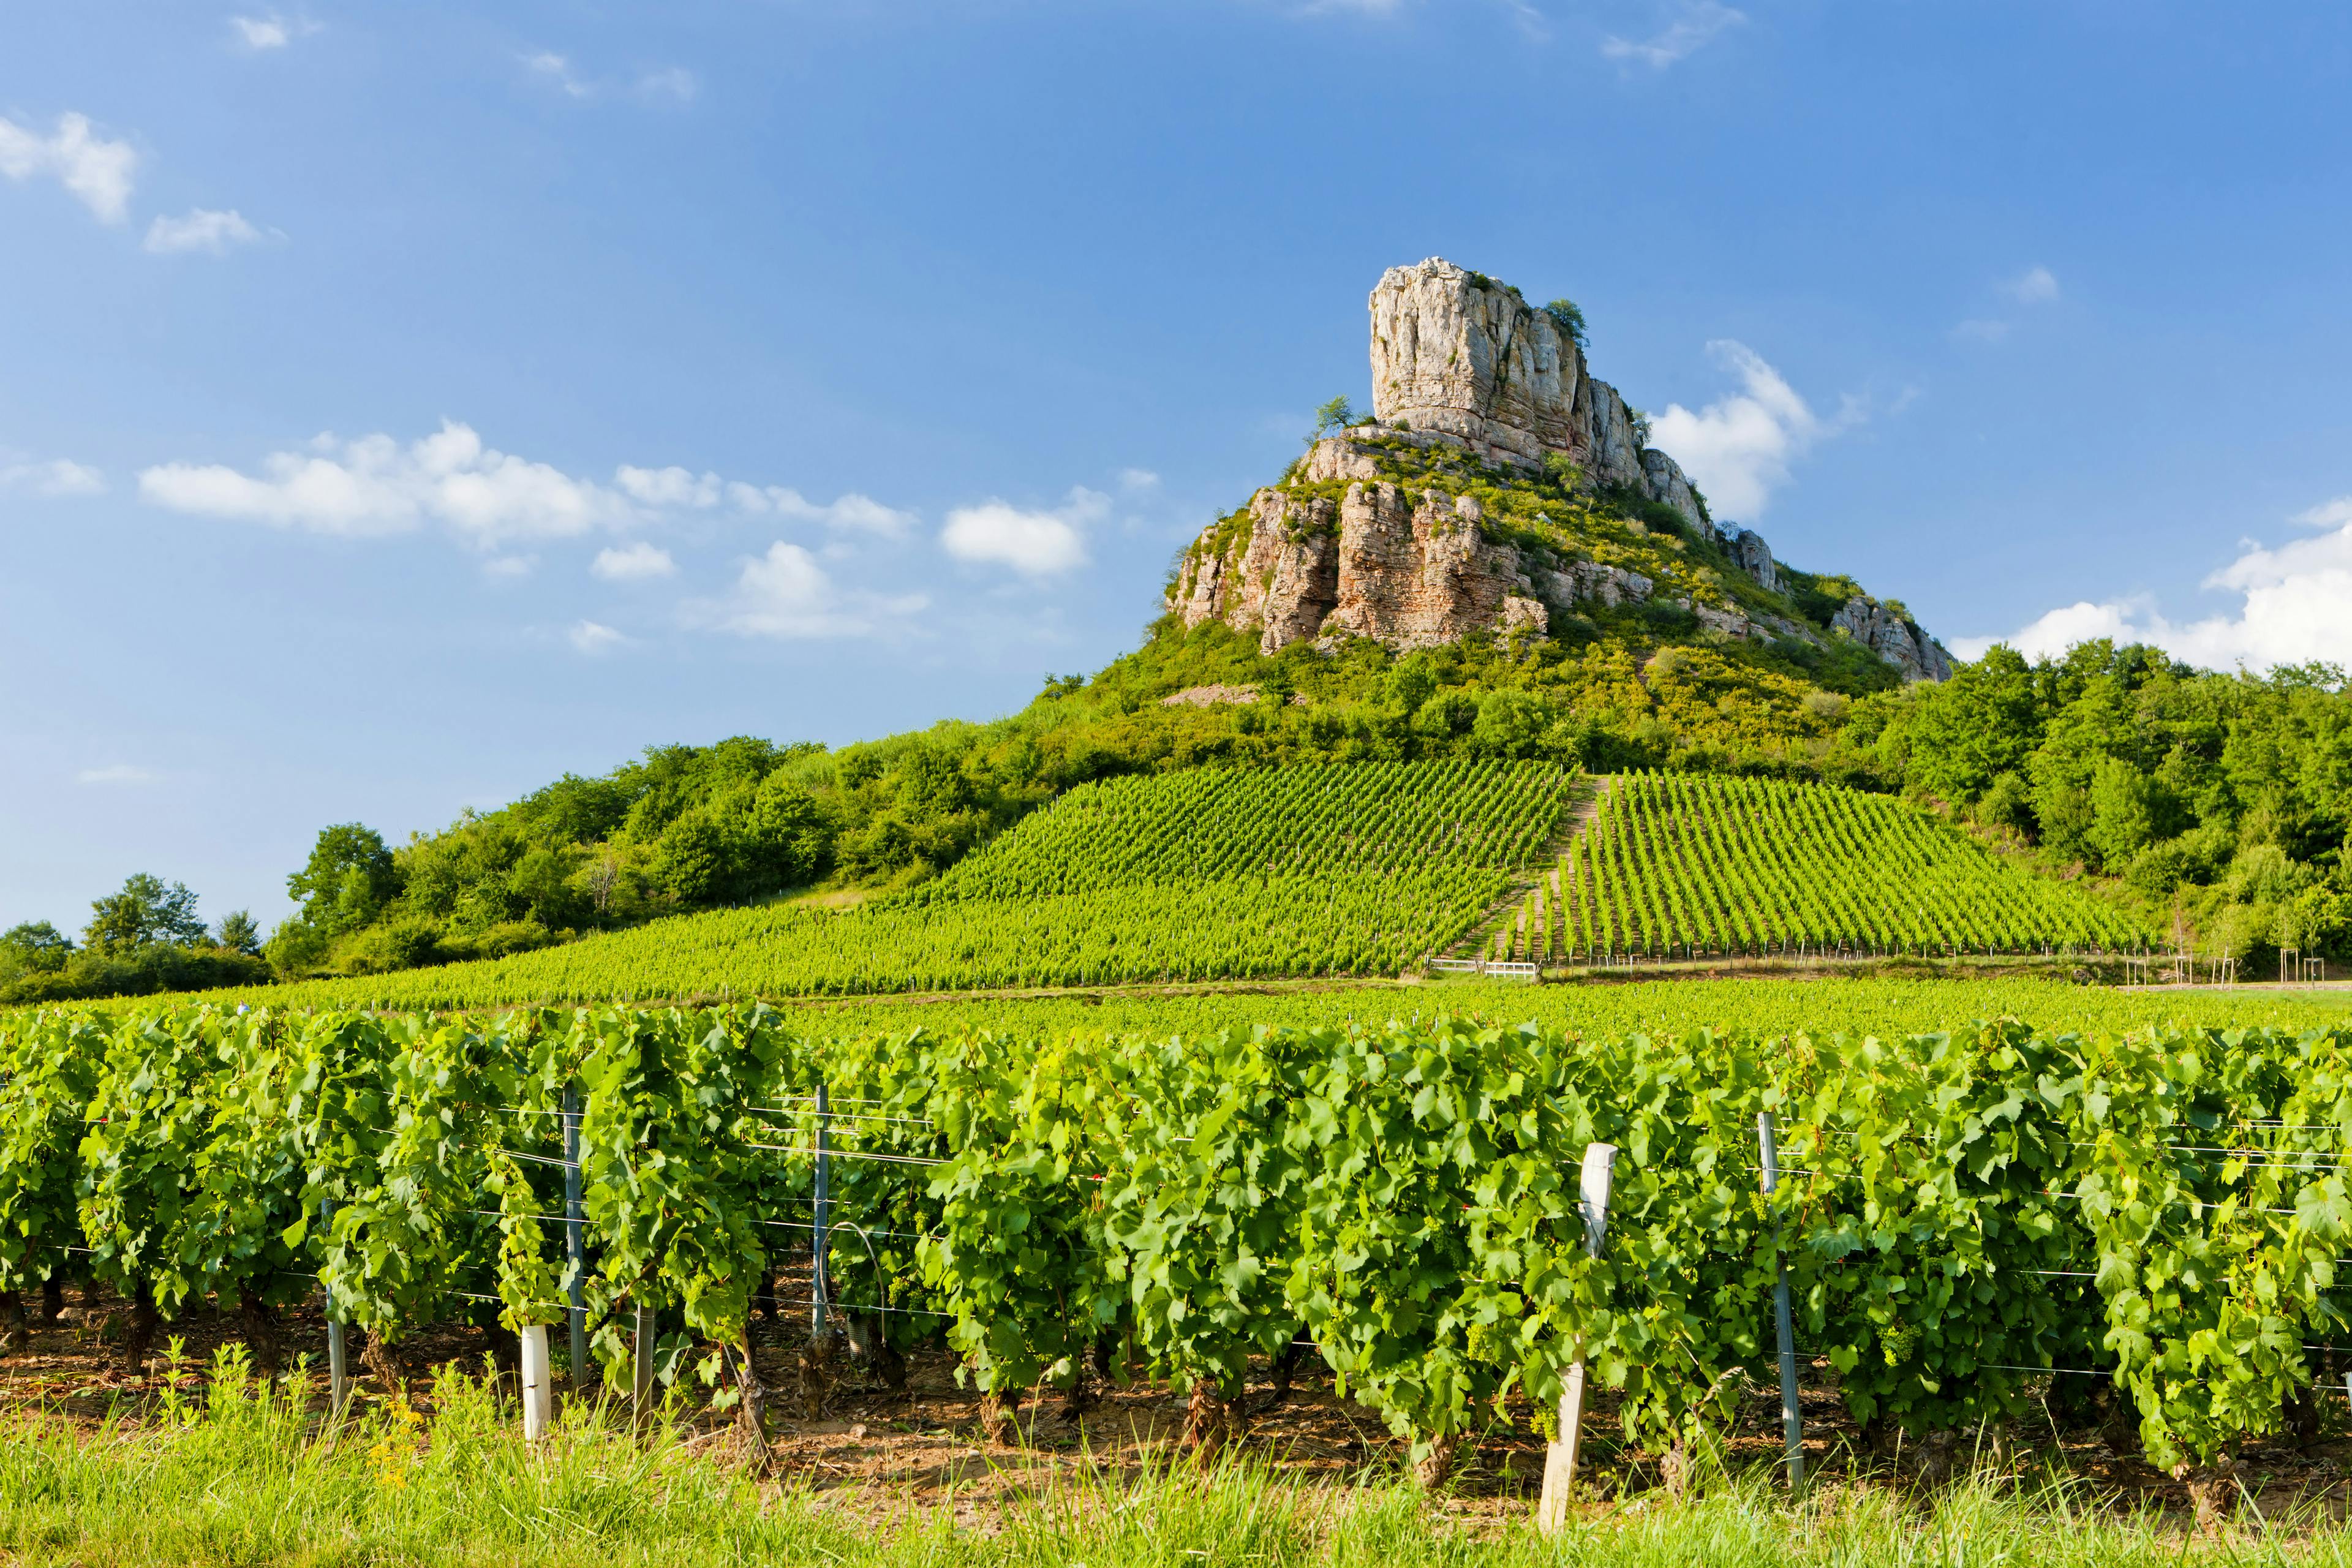 Rock of Solutre with the Pouilly-fuisse vineyards, Burgundy, France.